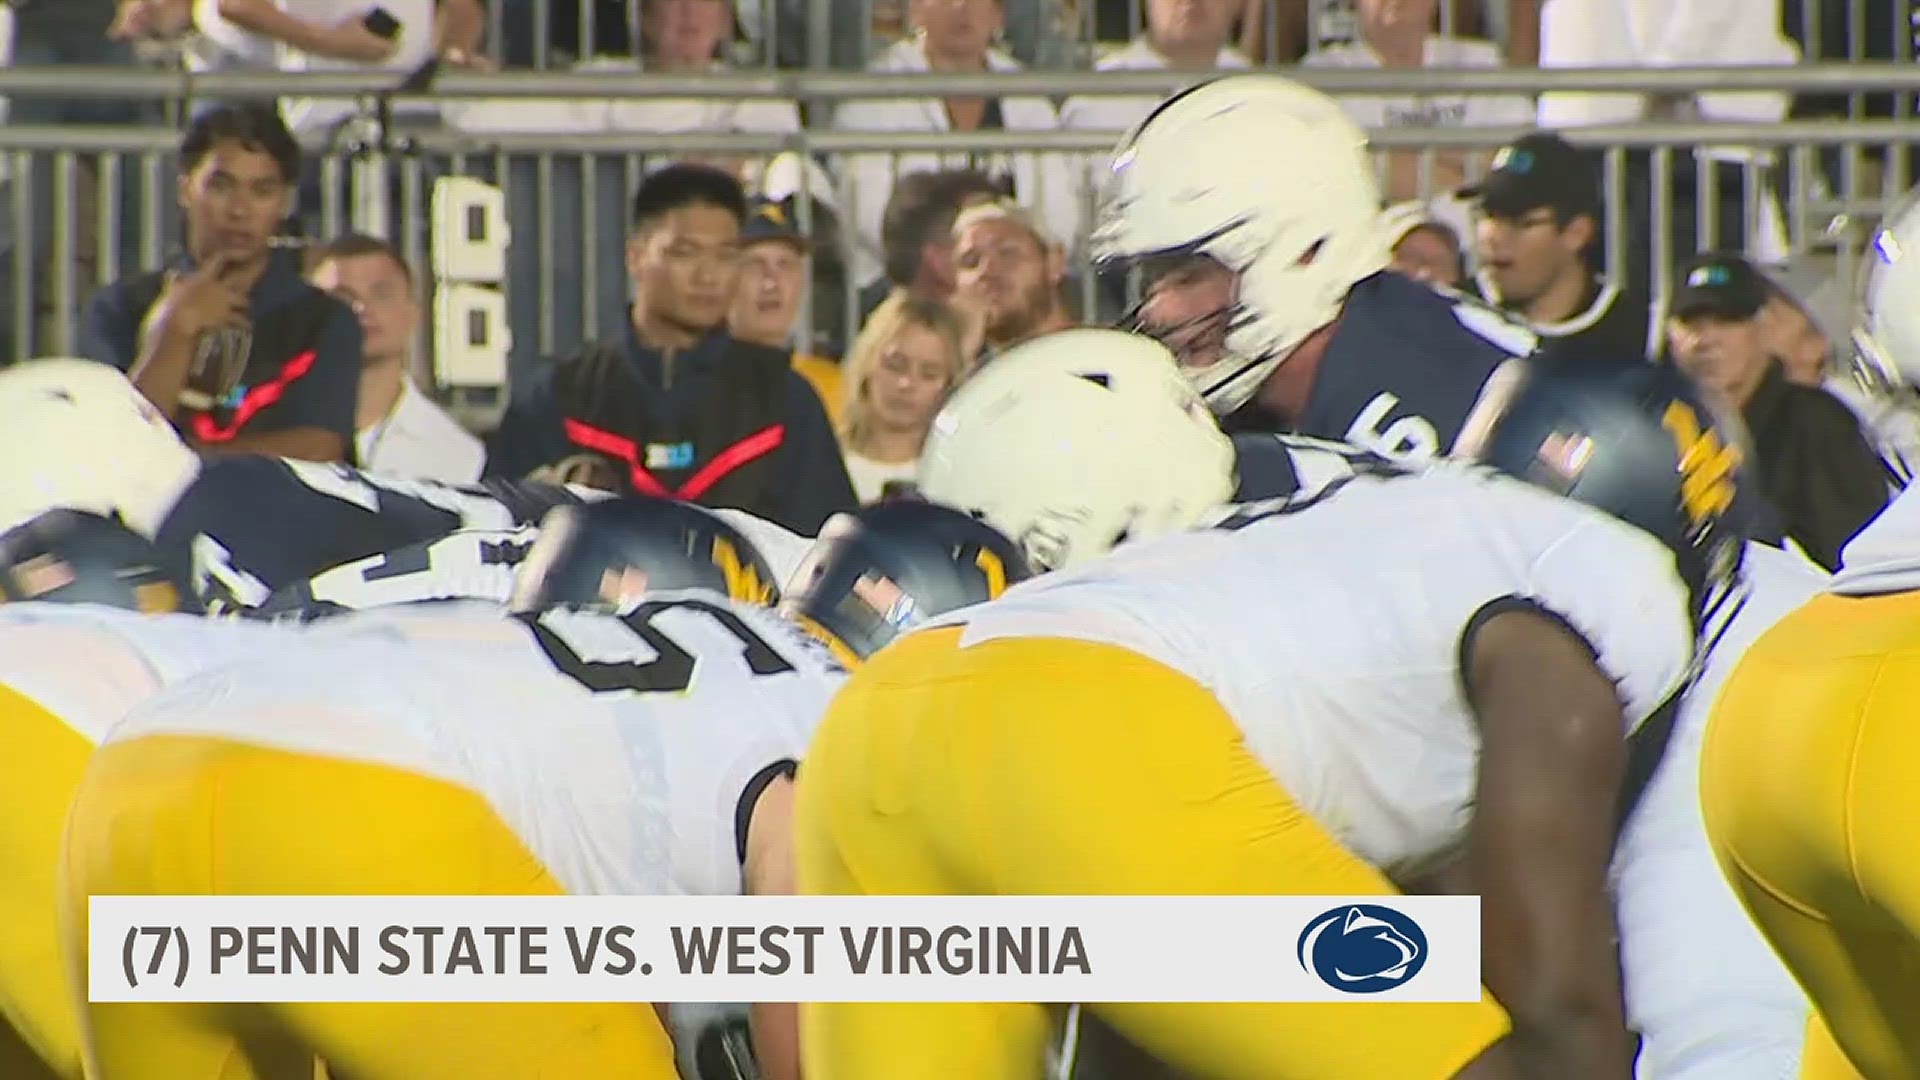 Nittany Lions defense shuts down Mountaineers while offense gains momentum in second half